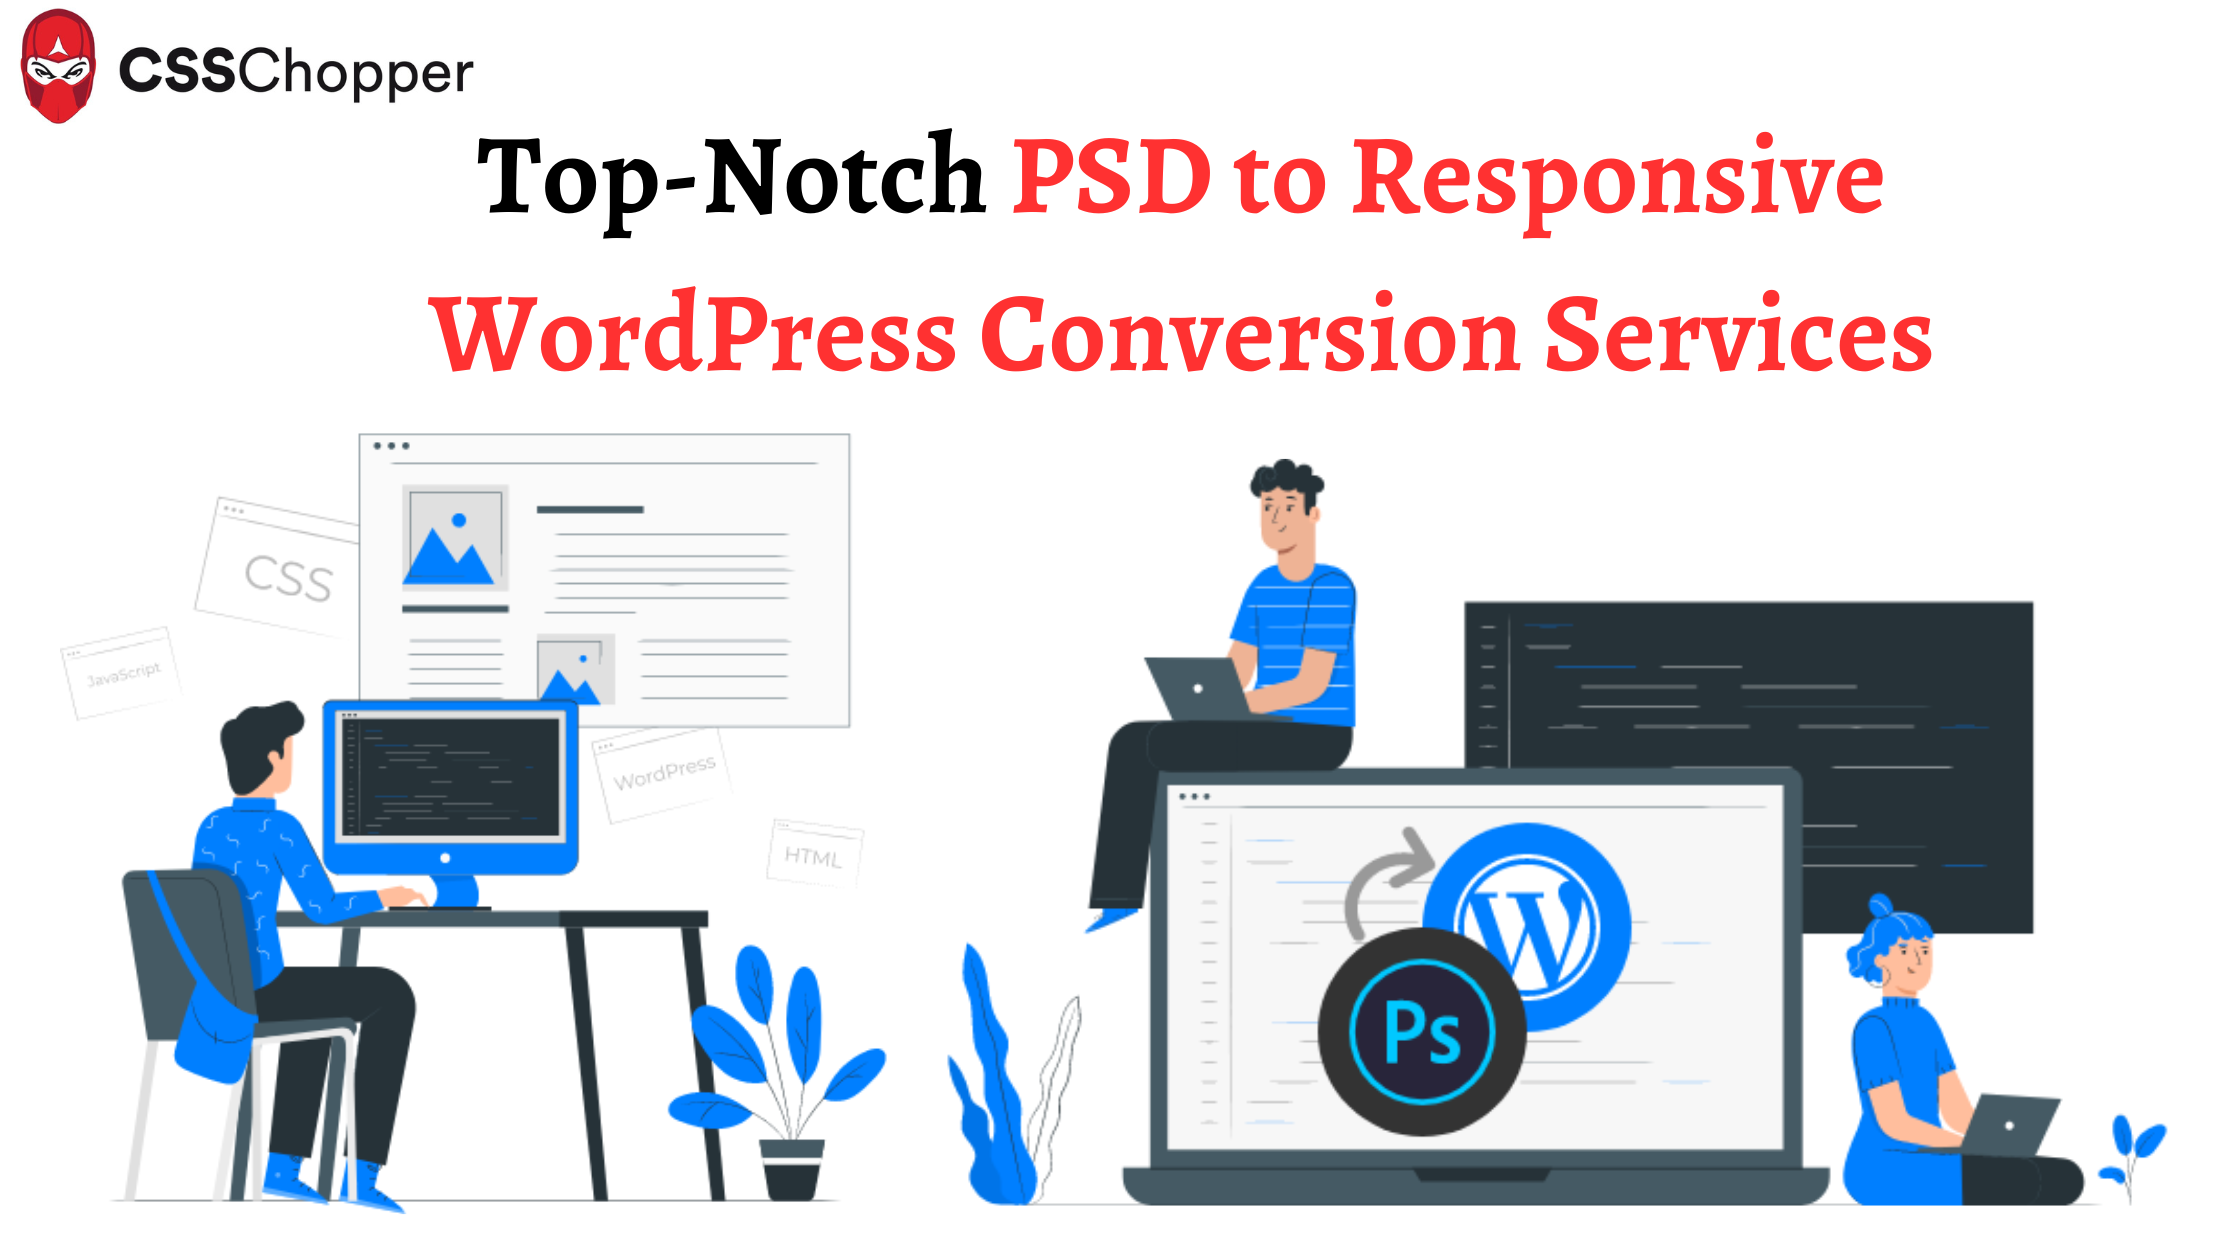 Top-Notch PSD to Responsive WordPress Conversion Services (1)